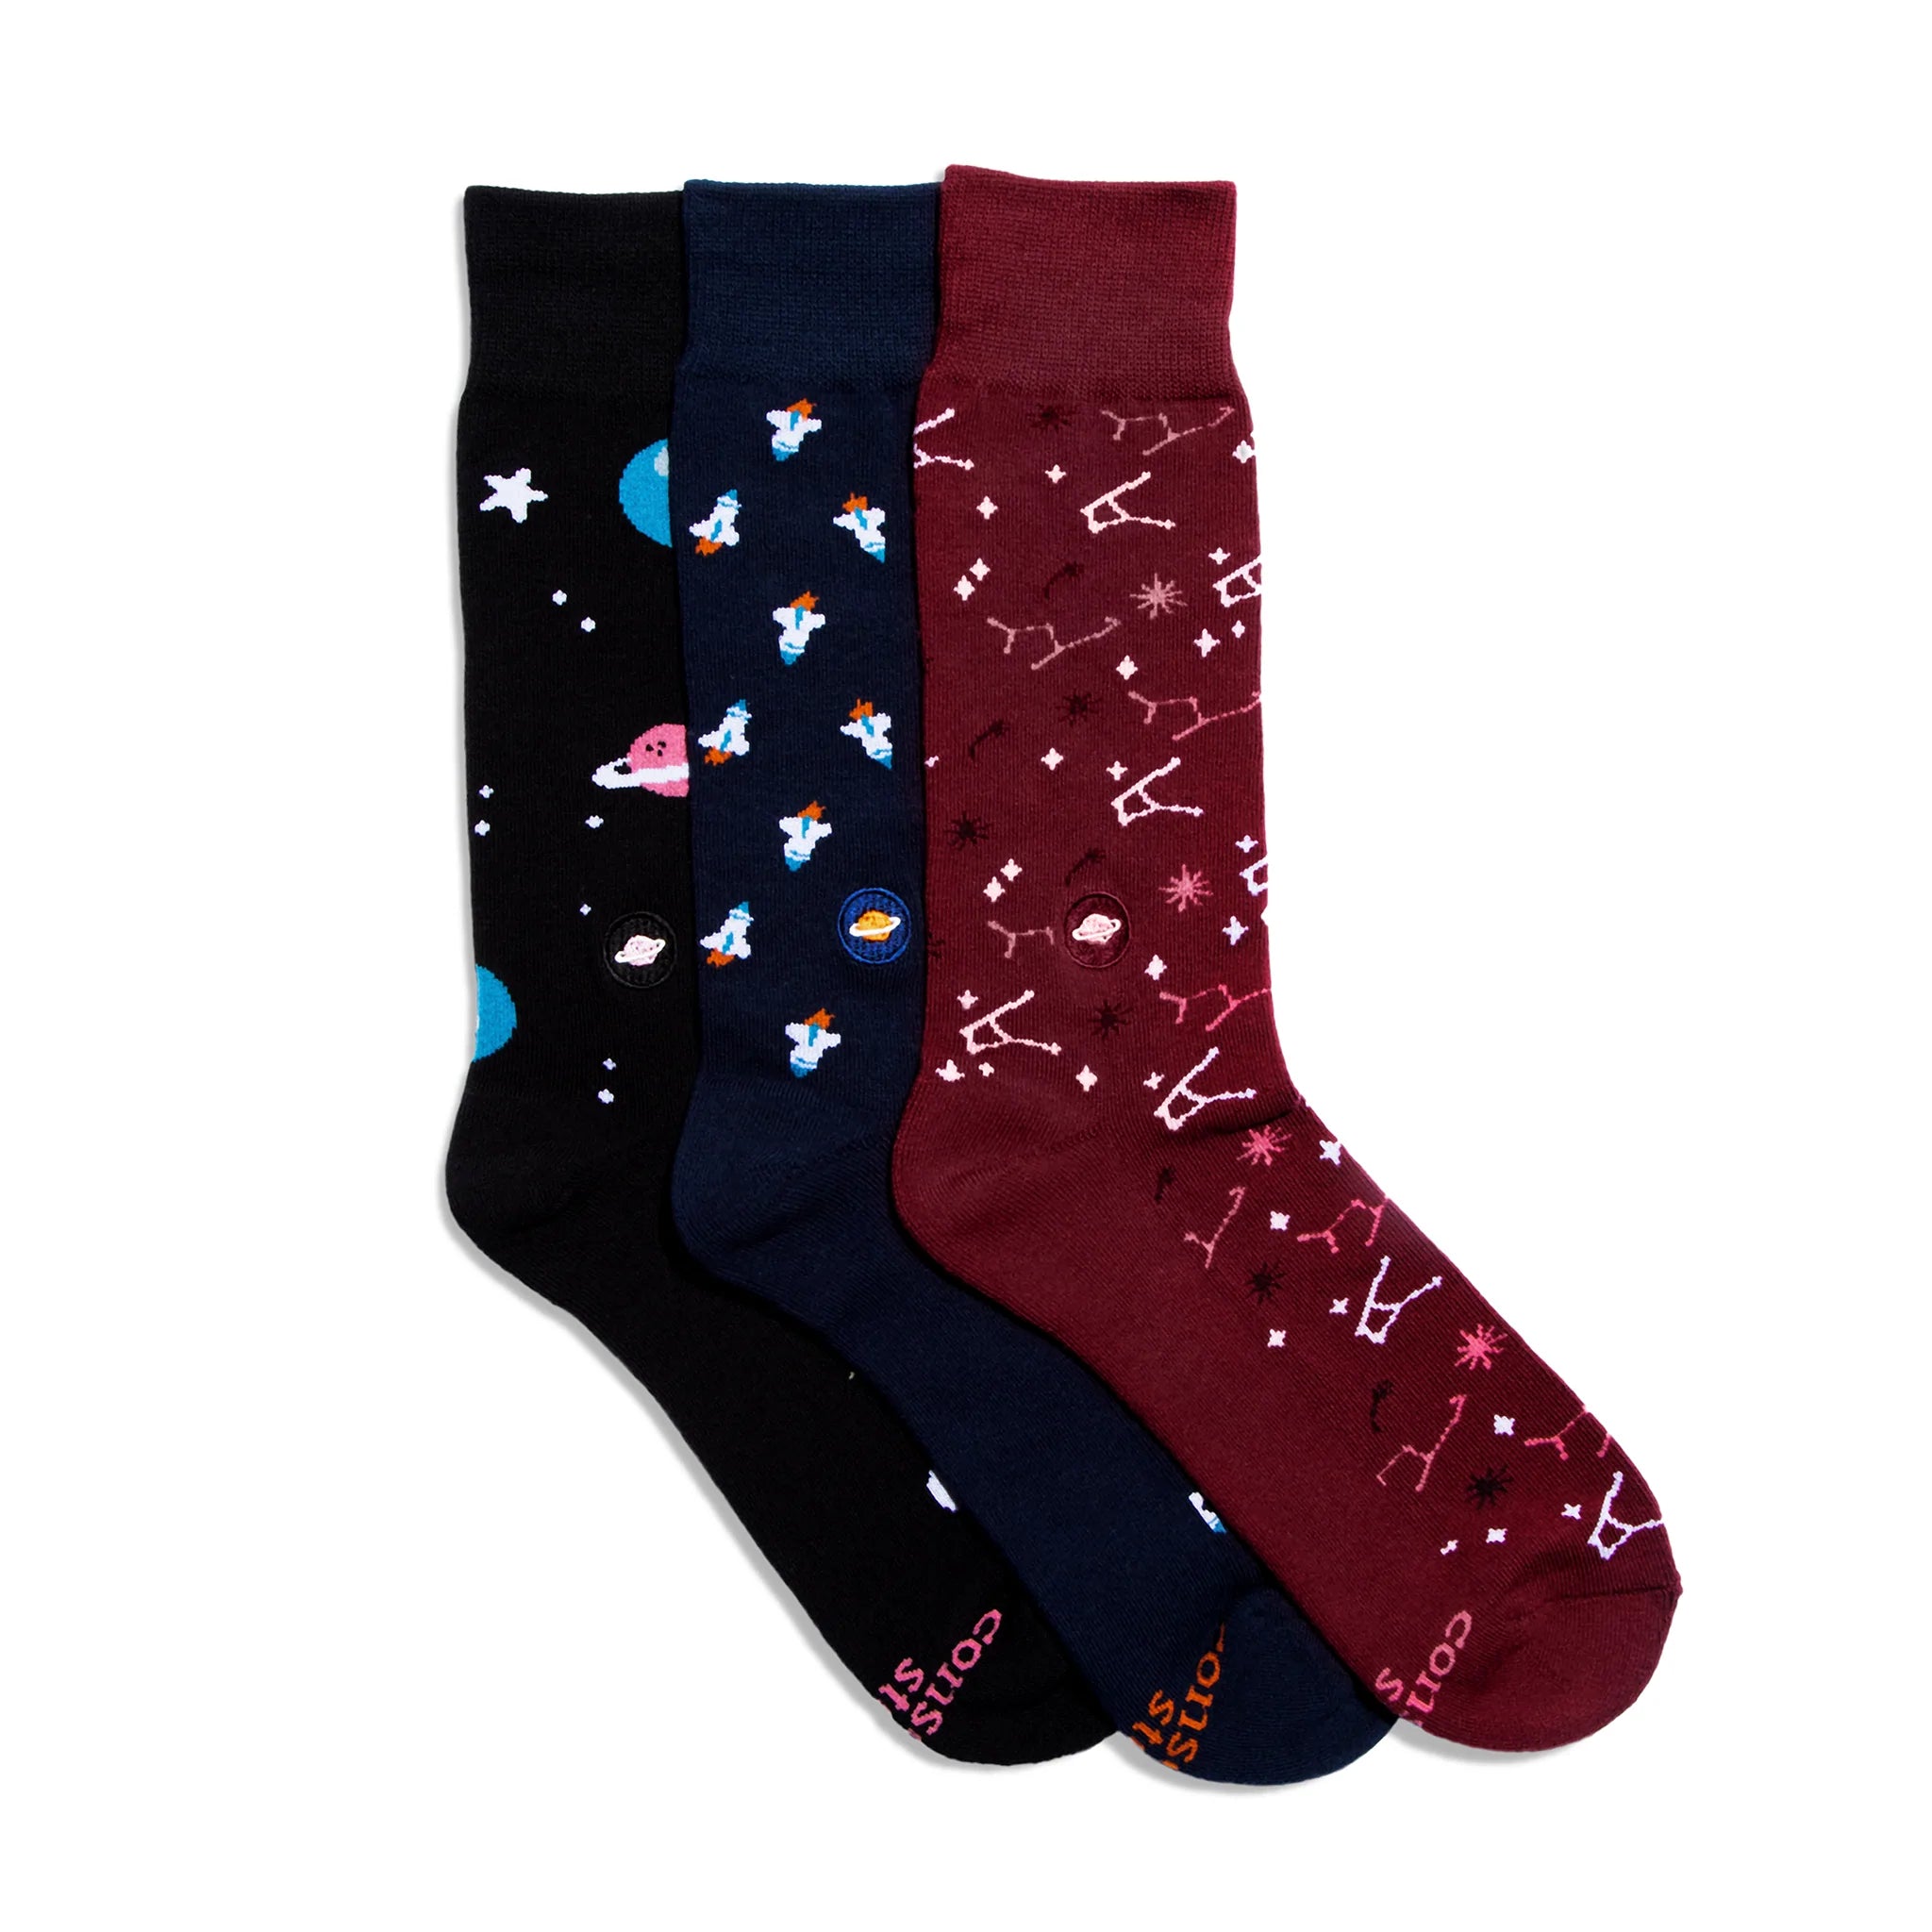 Socks That Support Space Exploration Collection - India